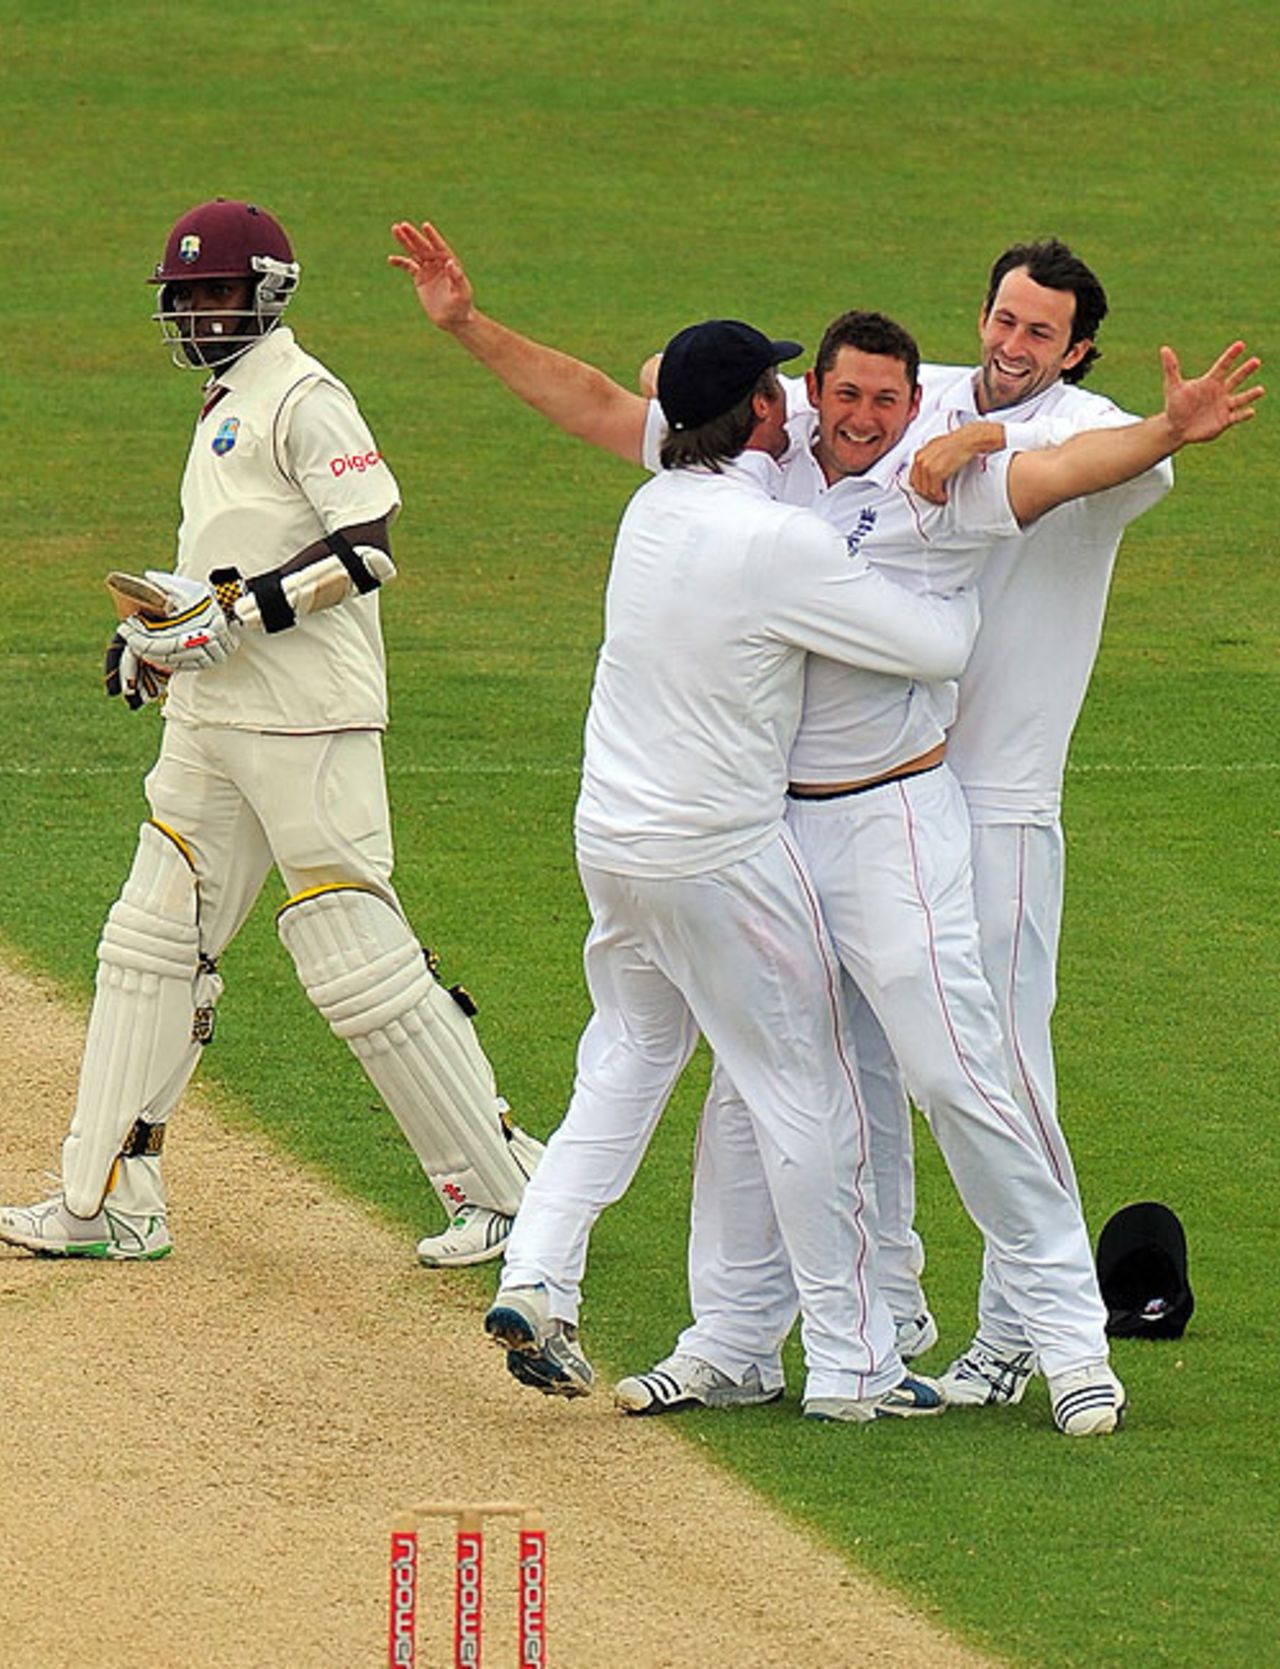 Fidel Edwards troops off after falling to Tim Bresnan, England v West Indies, 2nd Test, Chester-le-Street, 5th day, May 18, 2009